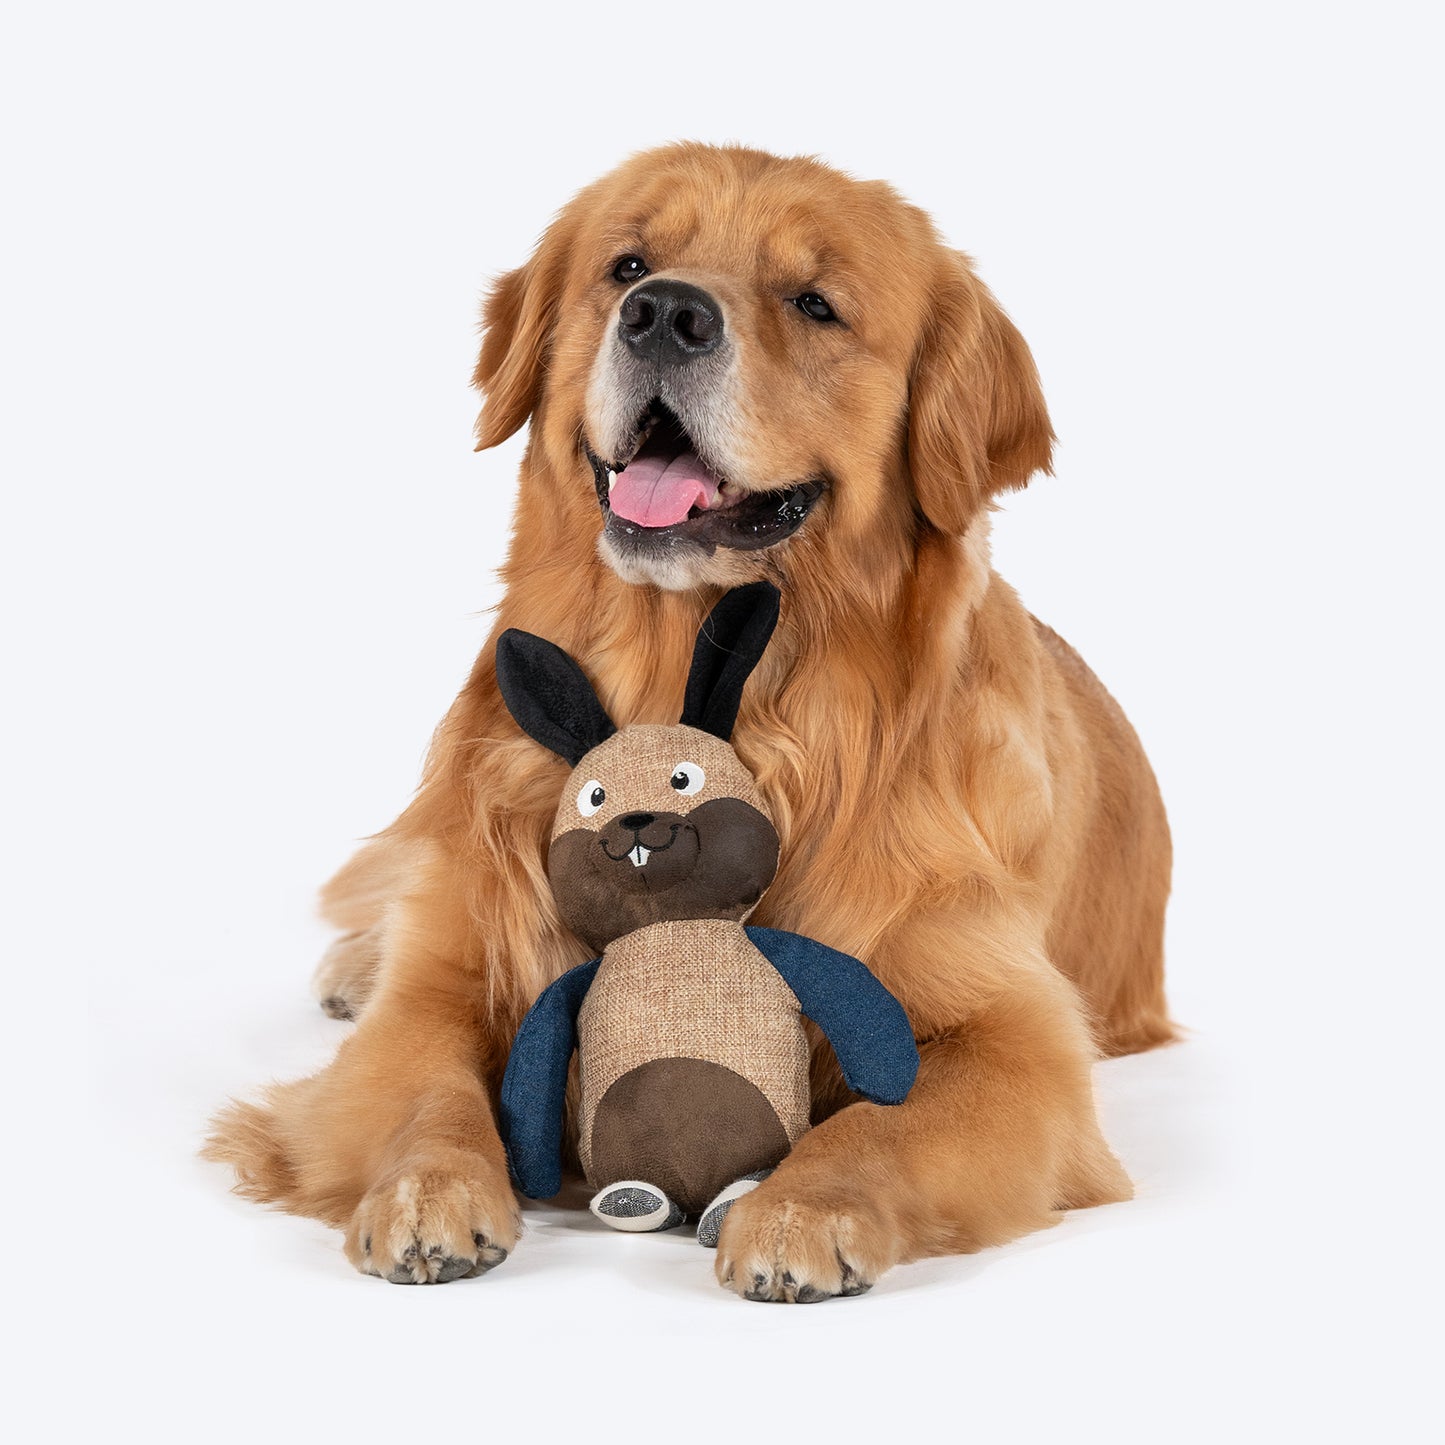 HUFT Rabbit Plush Toy For Dog - Brown - Heads Up For Tails